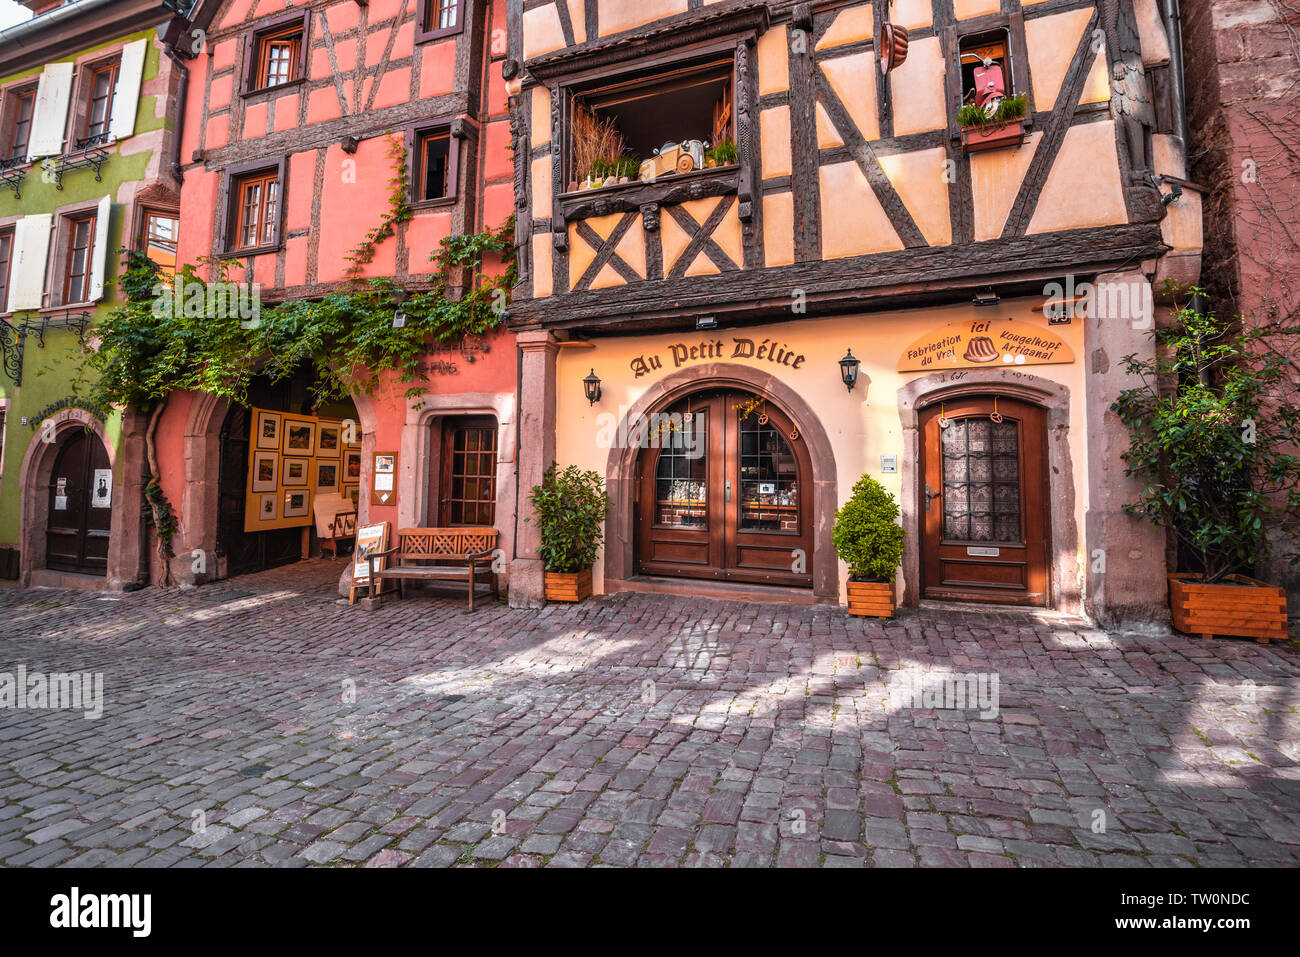 old timbered houses with carvings in the village Riquewihr, Alsace, France, typic Alsatian tourist destination Stock Photo